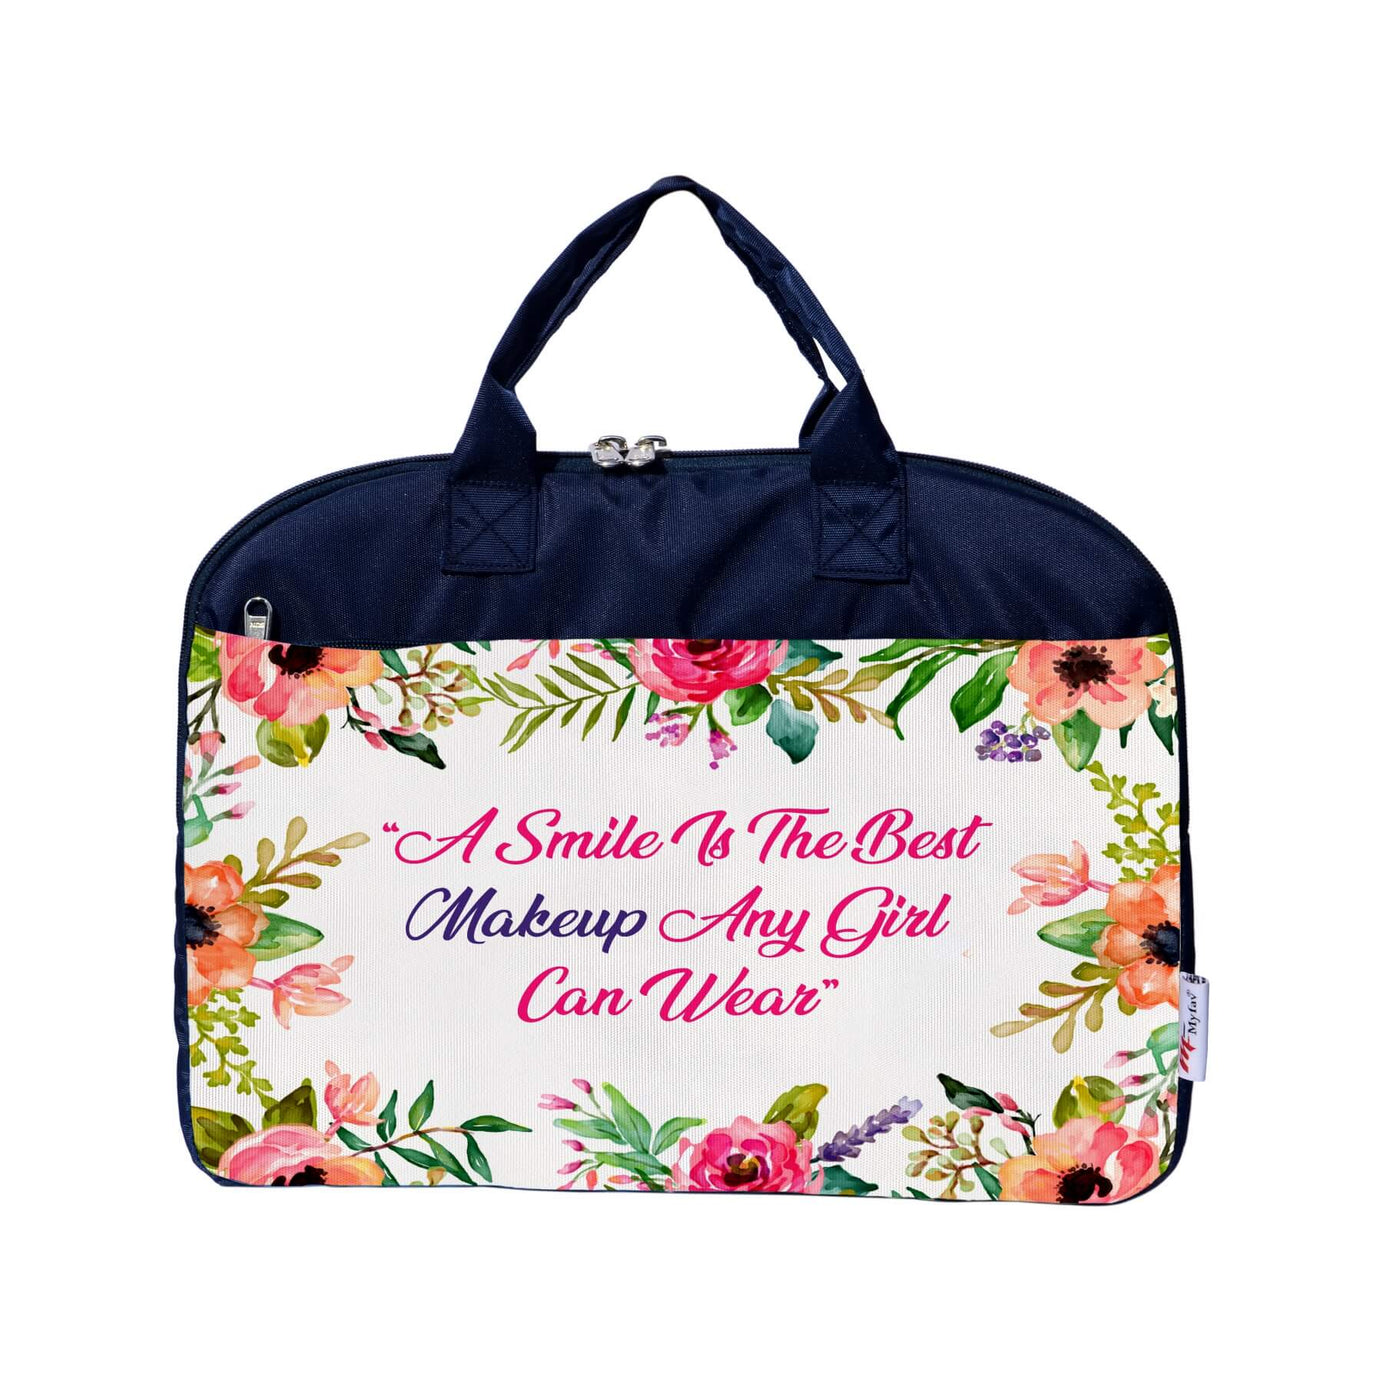 My Fav Girl Quote Office Laptop Bag Briefcase 15.6 Inch for Women and Men